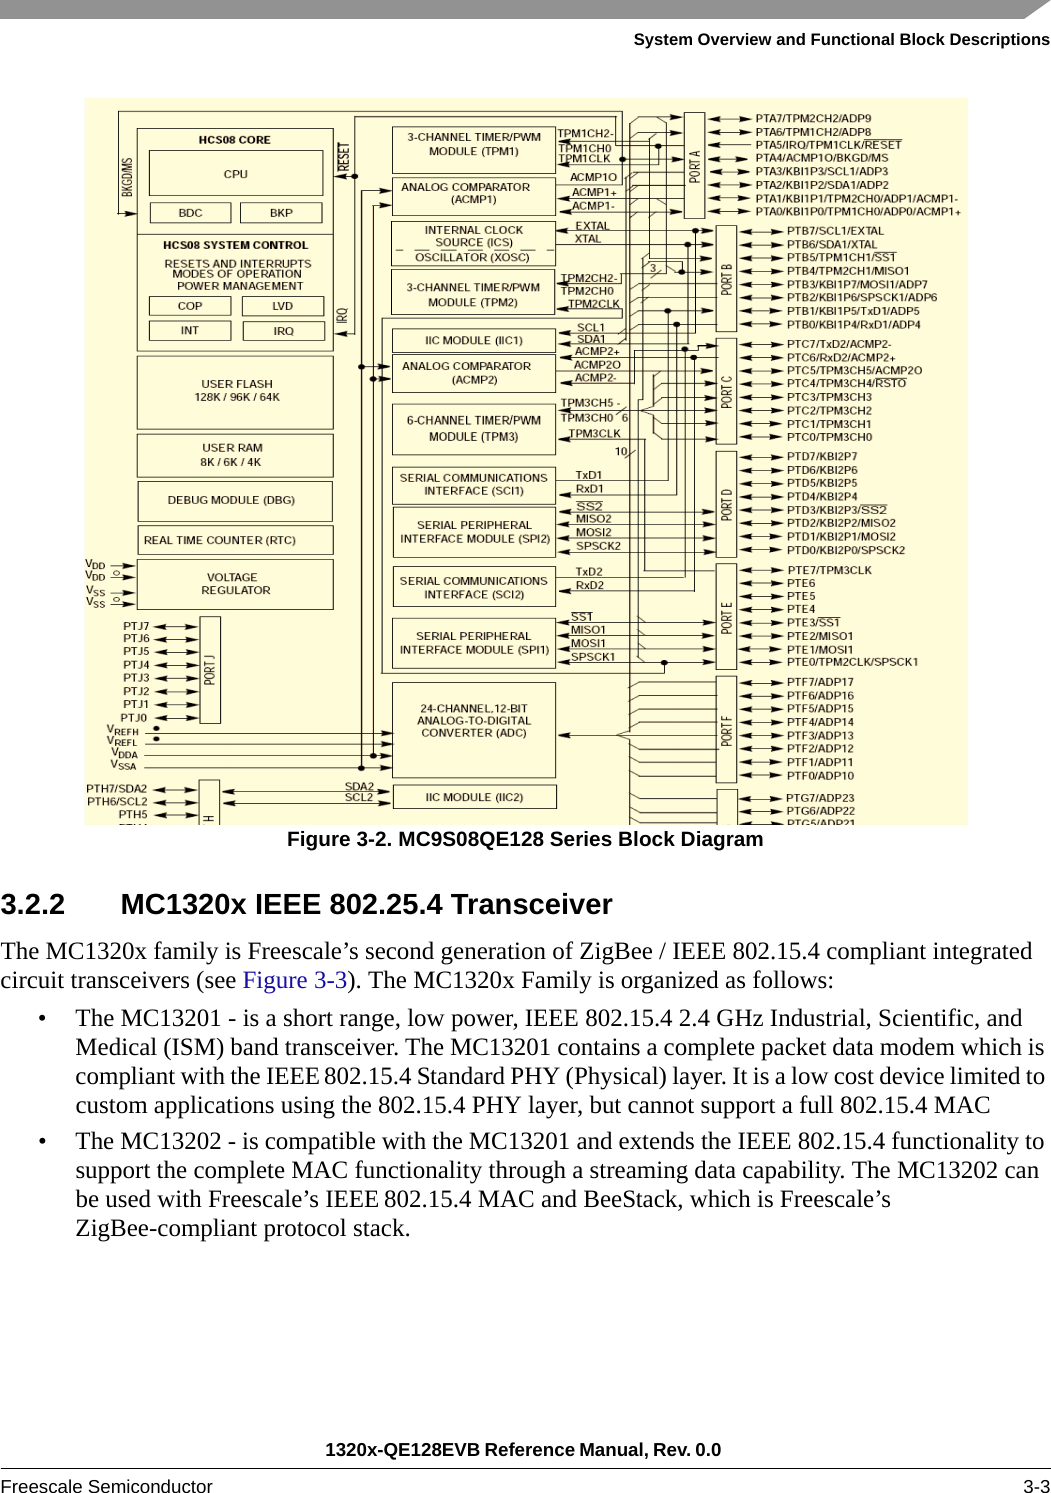 System Overview and Functional Block Descriptions1320x-QE128EVB Reference Manual, Rev. 0.0 Freescale Semiconductor 3-3Figure 3-2. MC9S08QE128 Series Block Diagram3.2.2 MC1320x IEEE 802.25.4 TransceiverThe MC1320x family is Freescale’s second generation of ZigBee / IEEE 802.15.4 compliant integrated circuit transceivers (see Figure 3-3). The MC1320x Family is organized as follows:• The MC13201 - is a short range, low power, IEEE 802.15.4 2.4 GHz Industrial, Scientific, and Medical (ISM) band transceiver. The MC13201 contains a complete packet data modem which is compliant with the IEEE 802.15.4 Standard PHY (Physical) layer. It is a low cost device limited to custom applications using the 802.15.4 PHY layer, but cannot support a full 802.15.4 MAC• The MC13202 - is compatible with the MC13201 and extends the IEEE 802.15.4 functionality to support the complete MAC functionality through a streaming data capability. The MC13202 can be used with Freescale’s IEEE 802.15.4 MAC and BeeStack, which is Freescale’s ZigBee-compliant protocol stack.